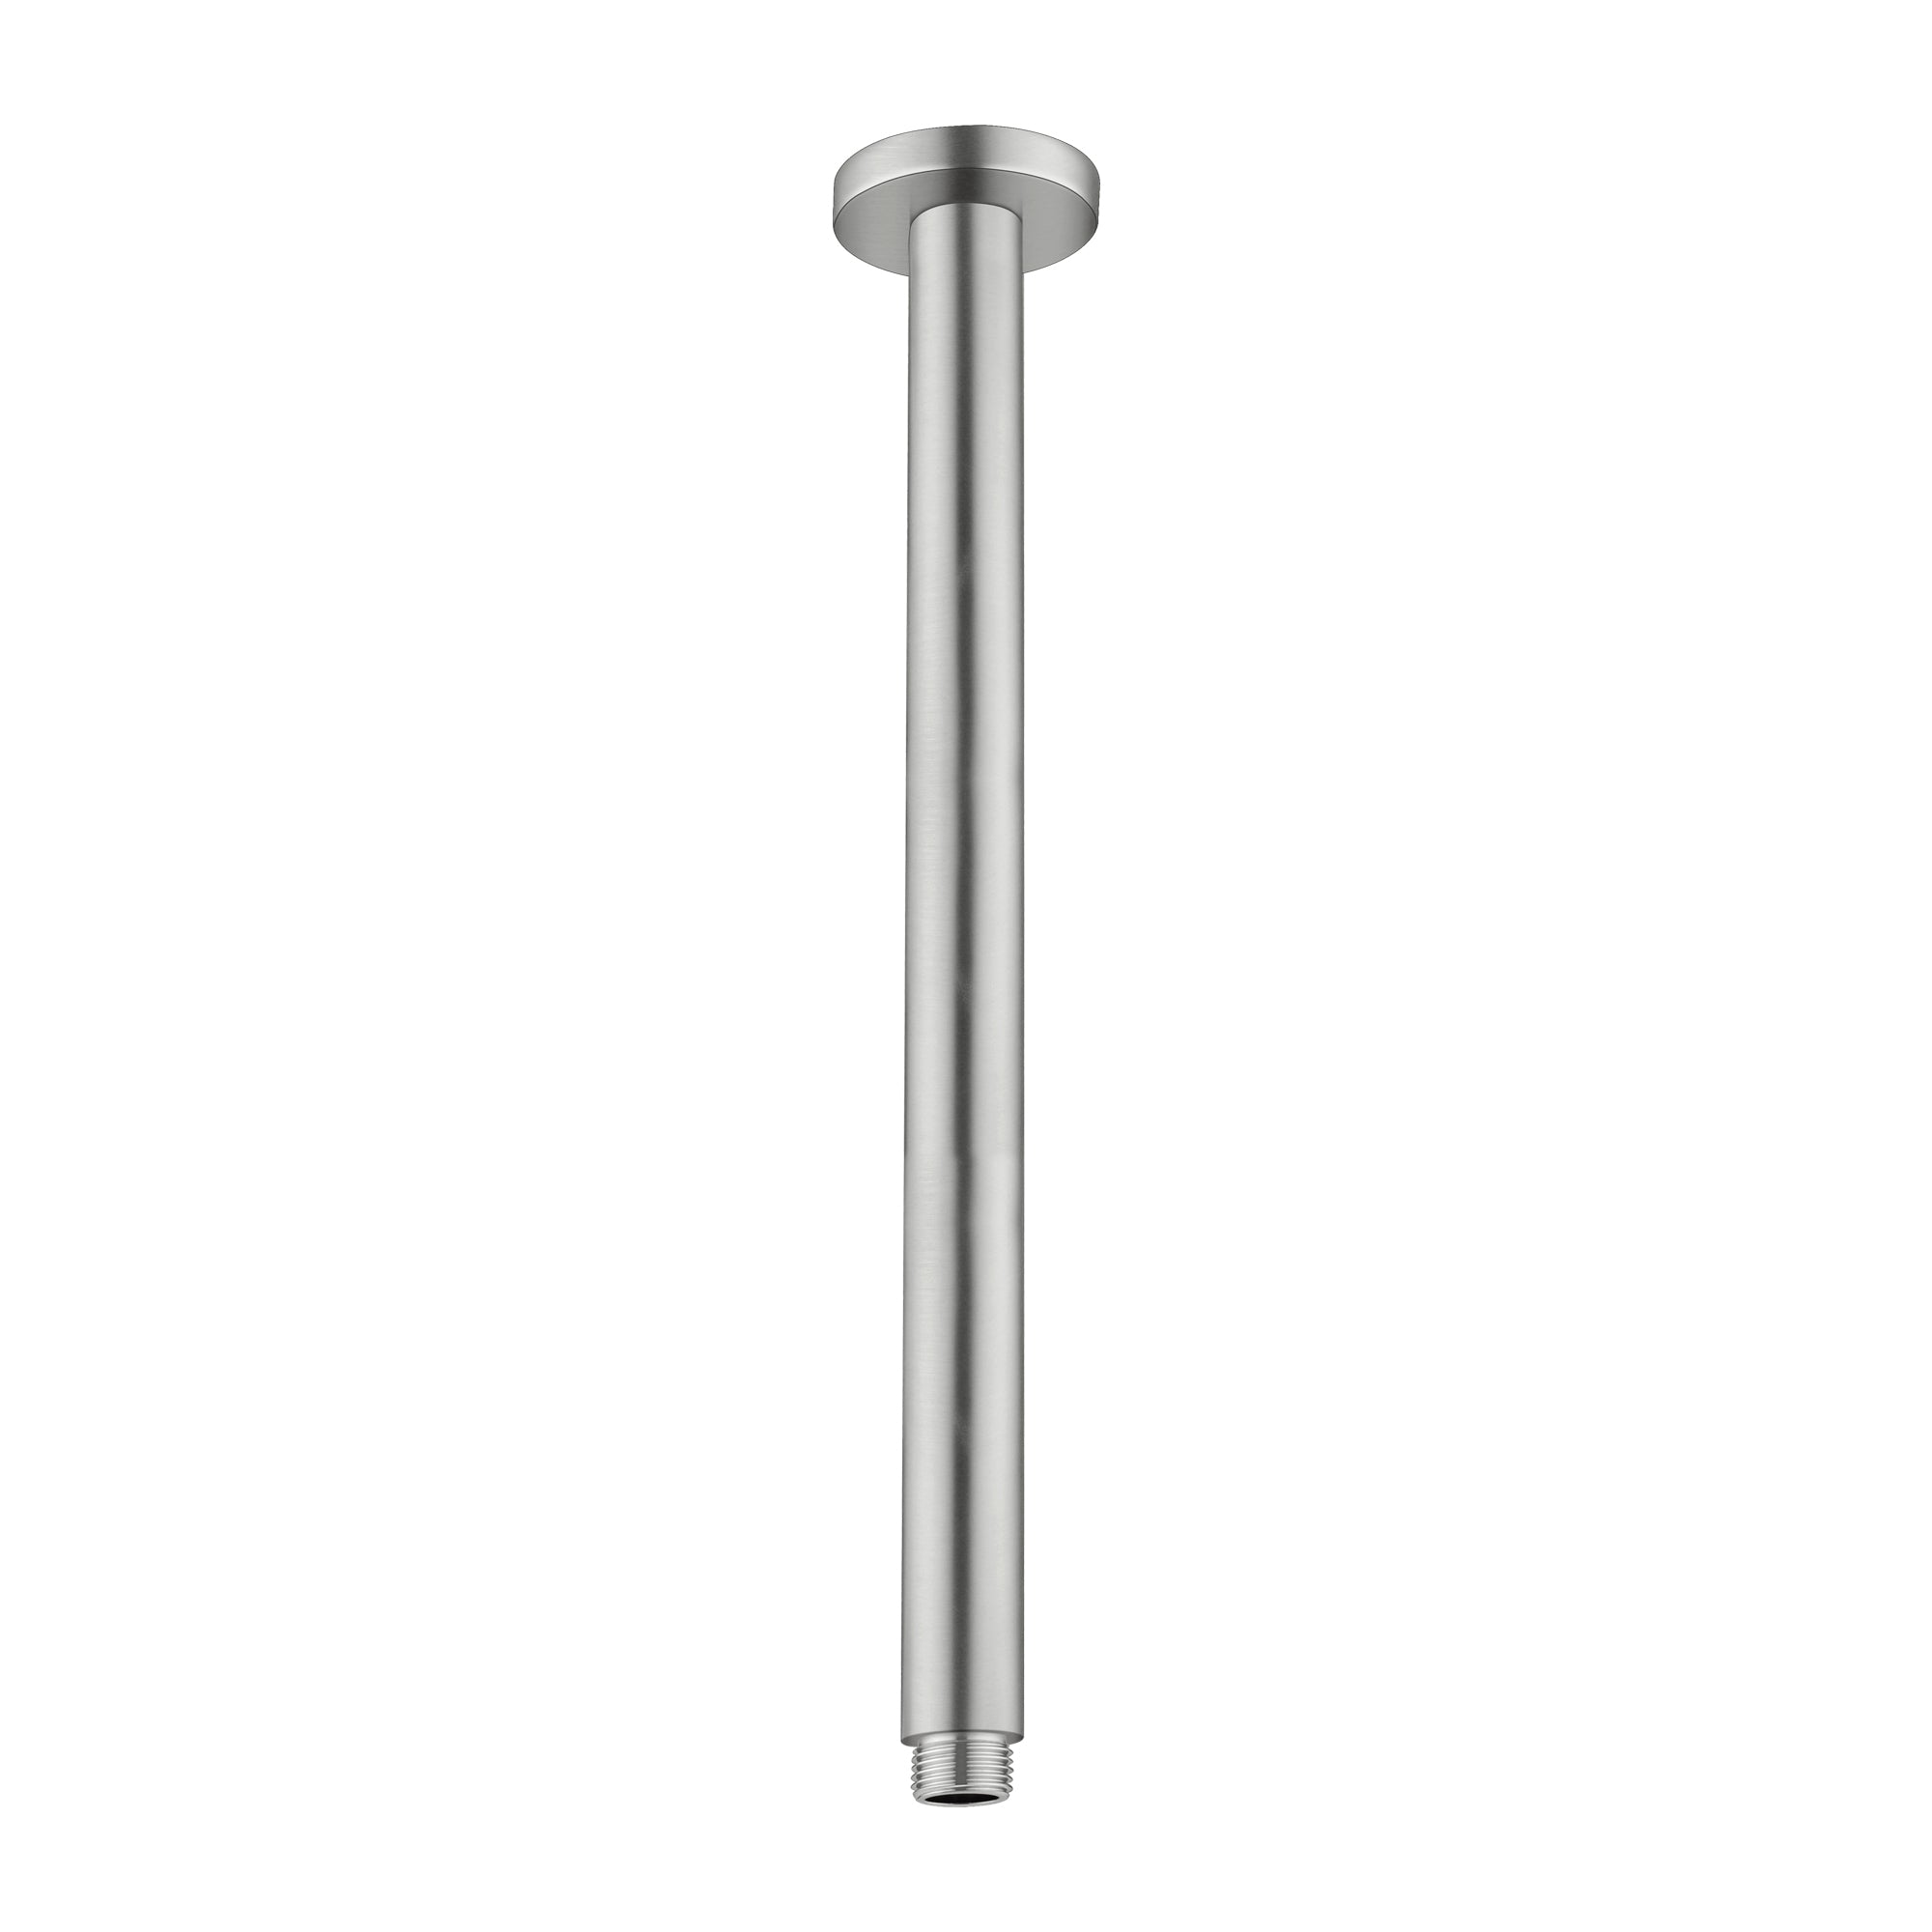 ROUND CEILING ARM 300MM LENGTH BRUSHED NICKEL